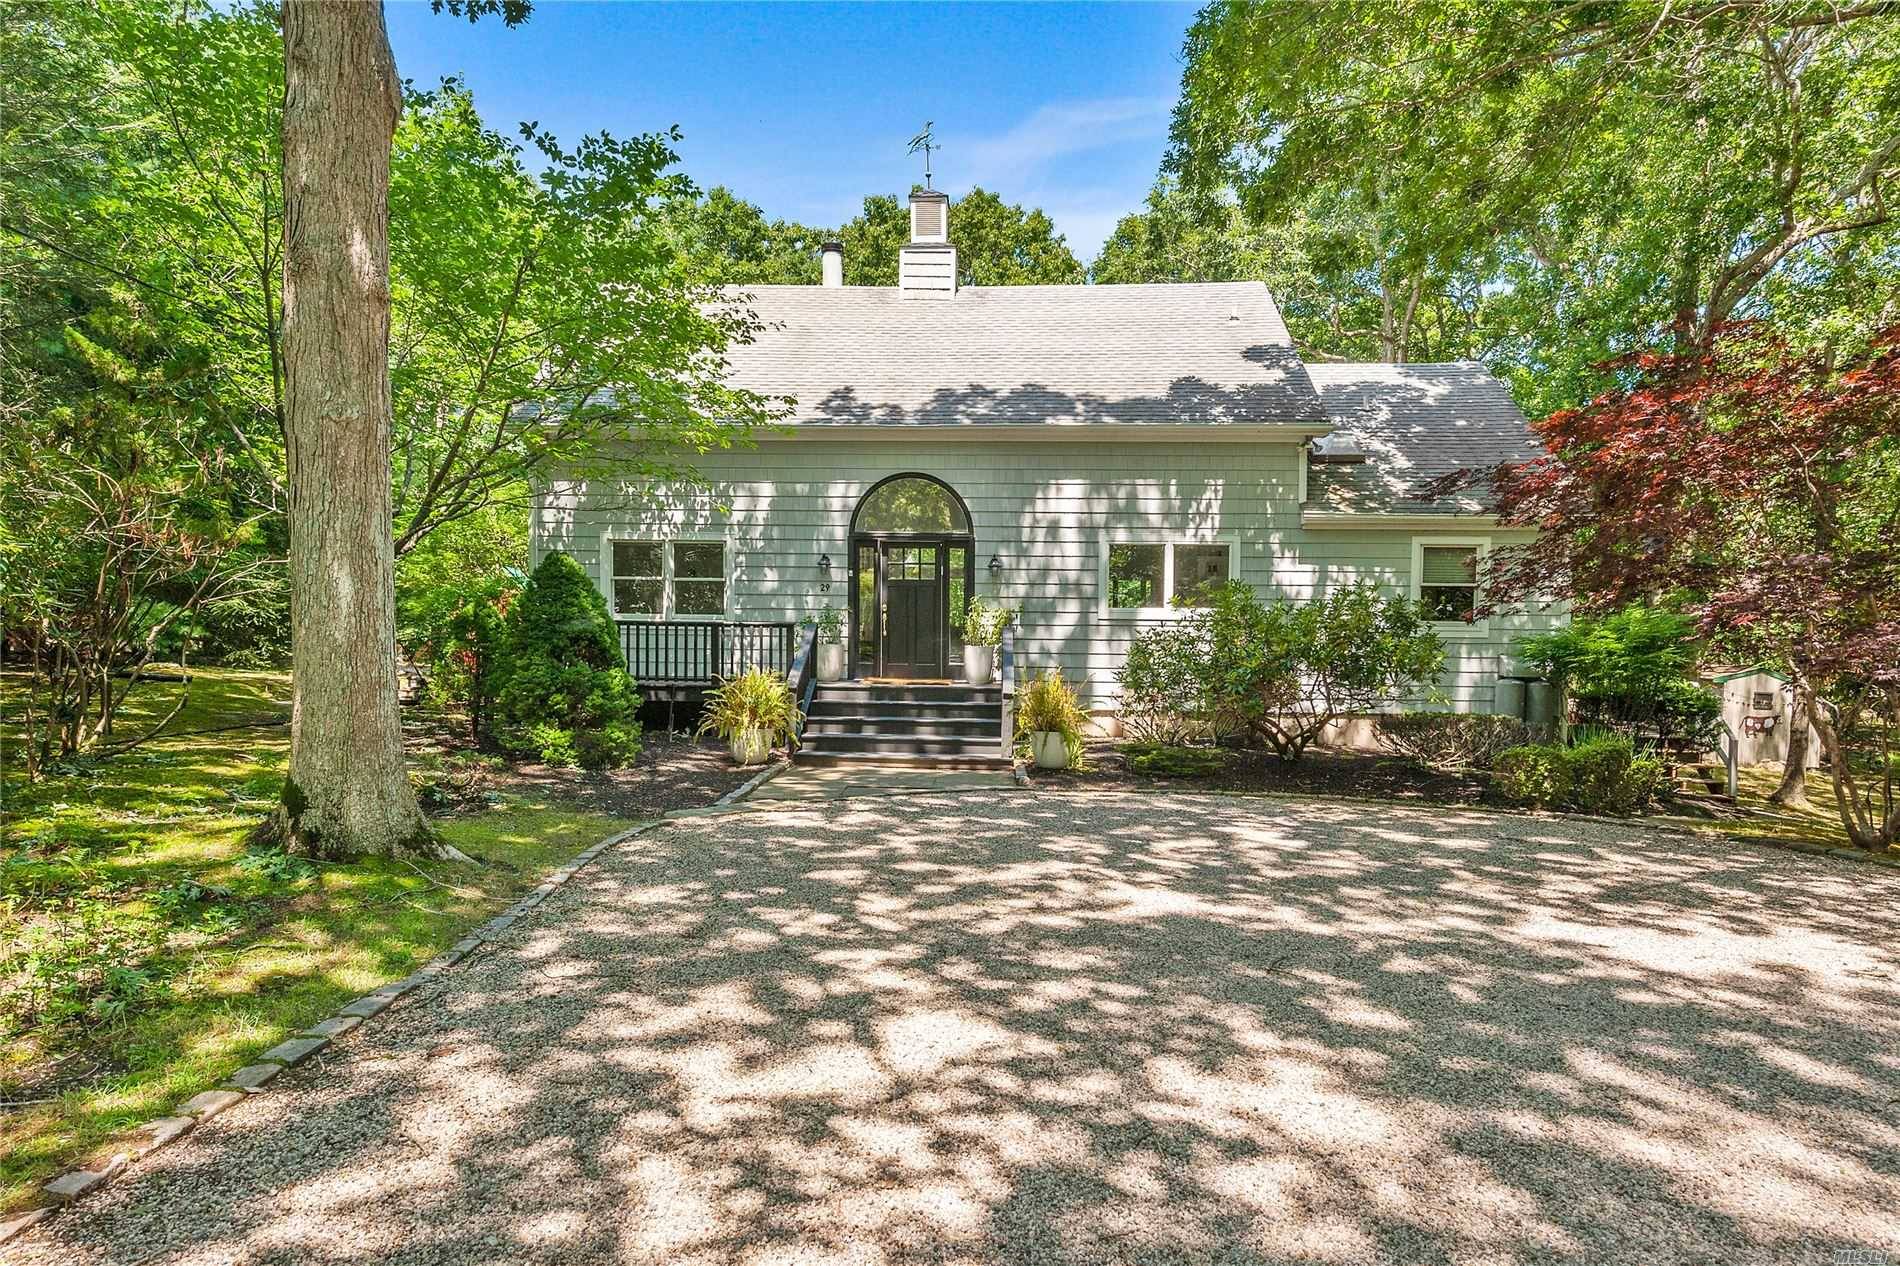 Sag Harbor Pond Front Cottage Enjoy the beauty and serenity of this Sag Harbor home overlooking Round Pond and part of the Long Pond Greenbelt trailhead, accessible at the end ...